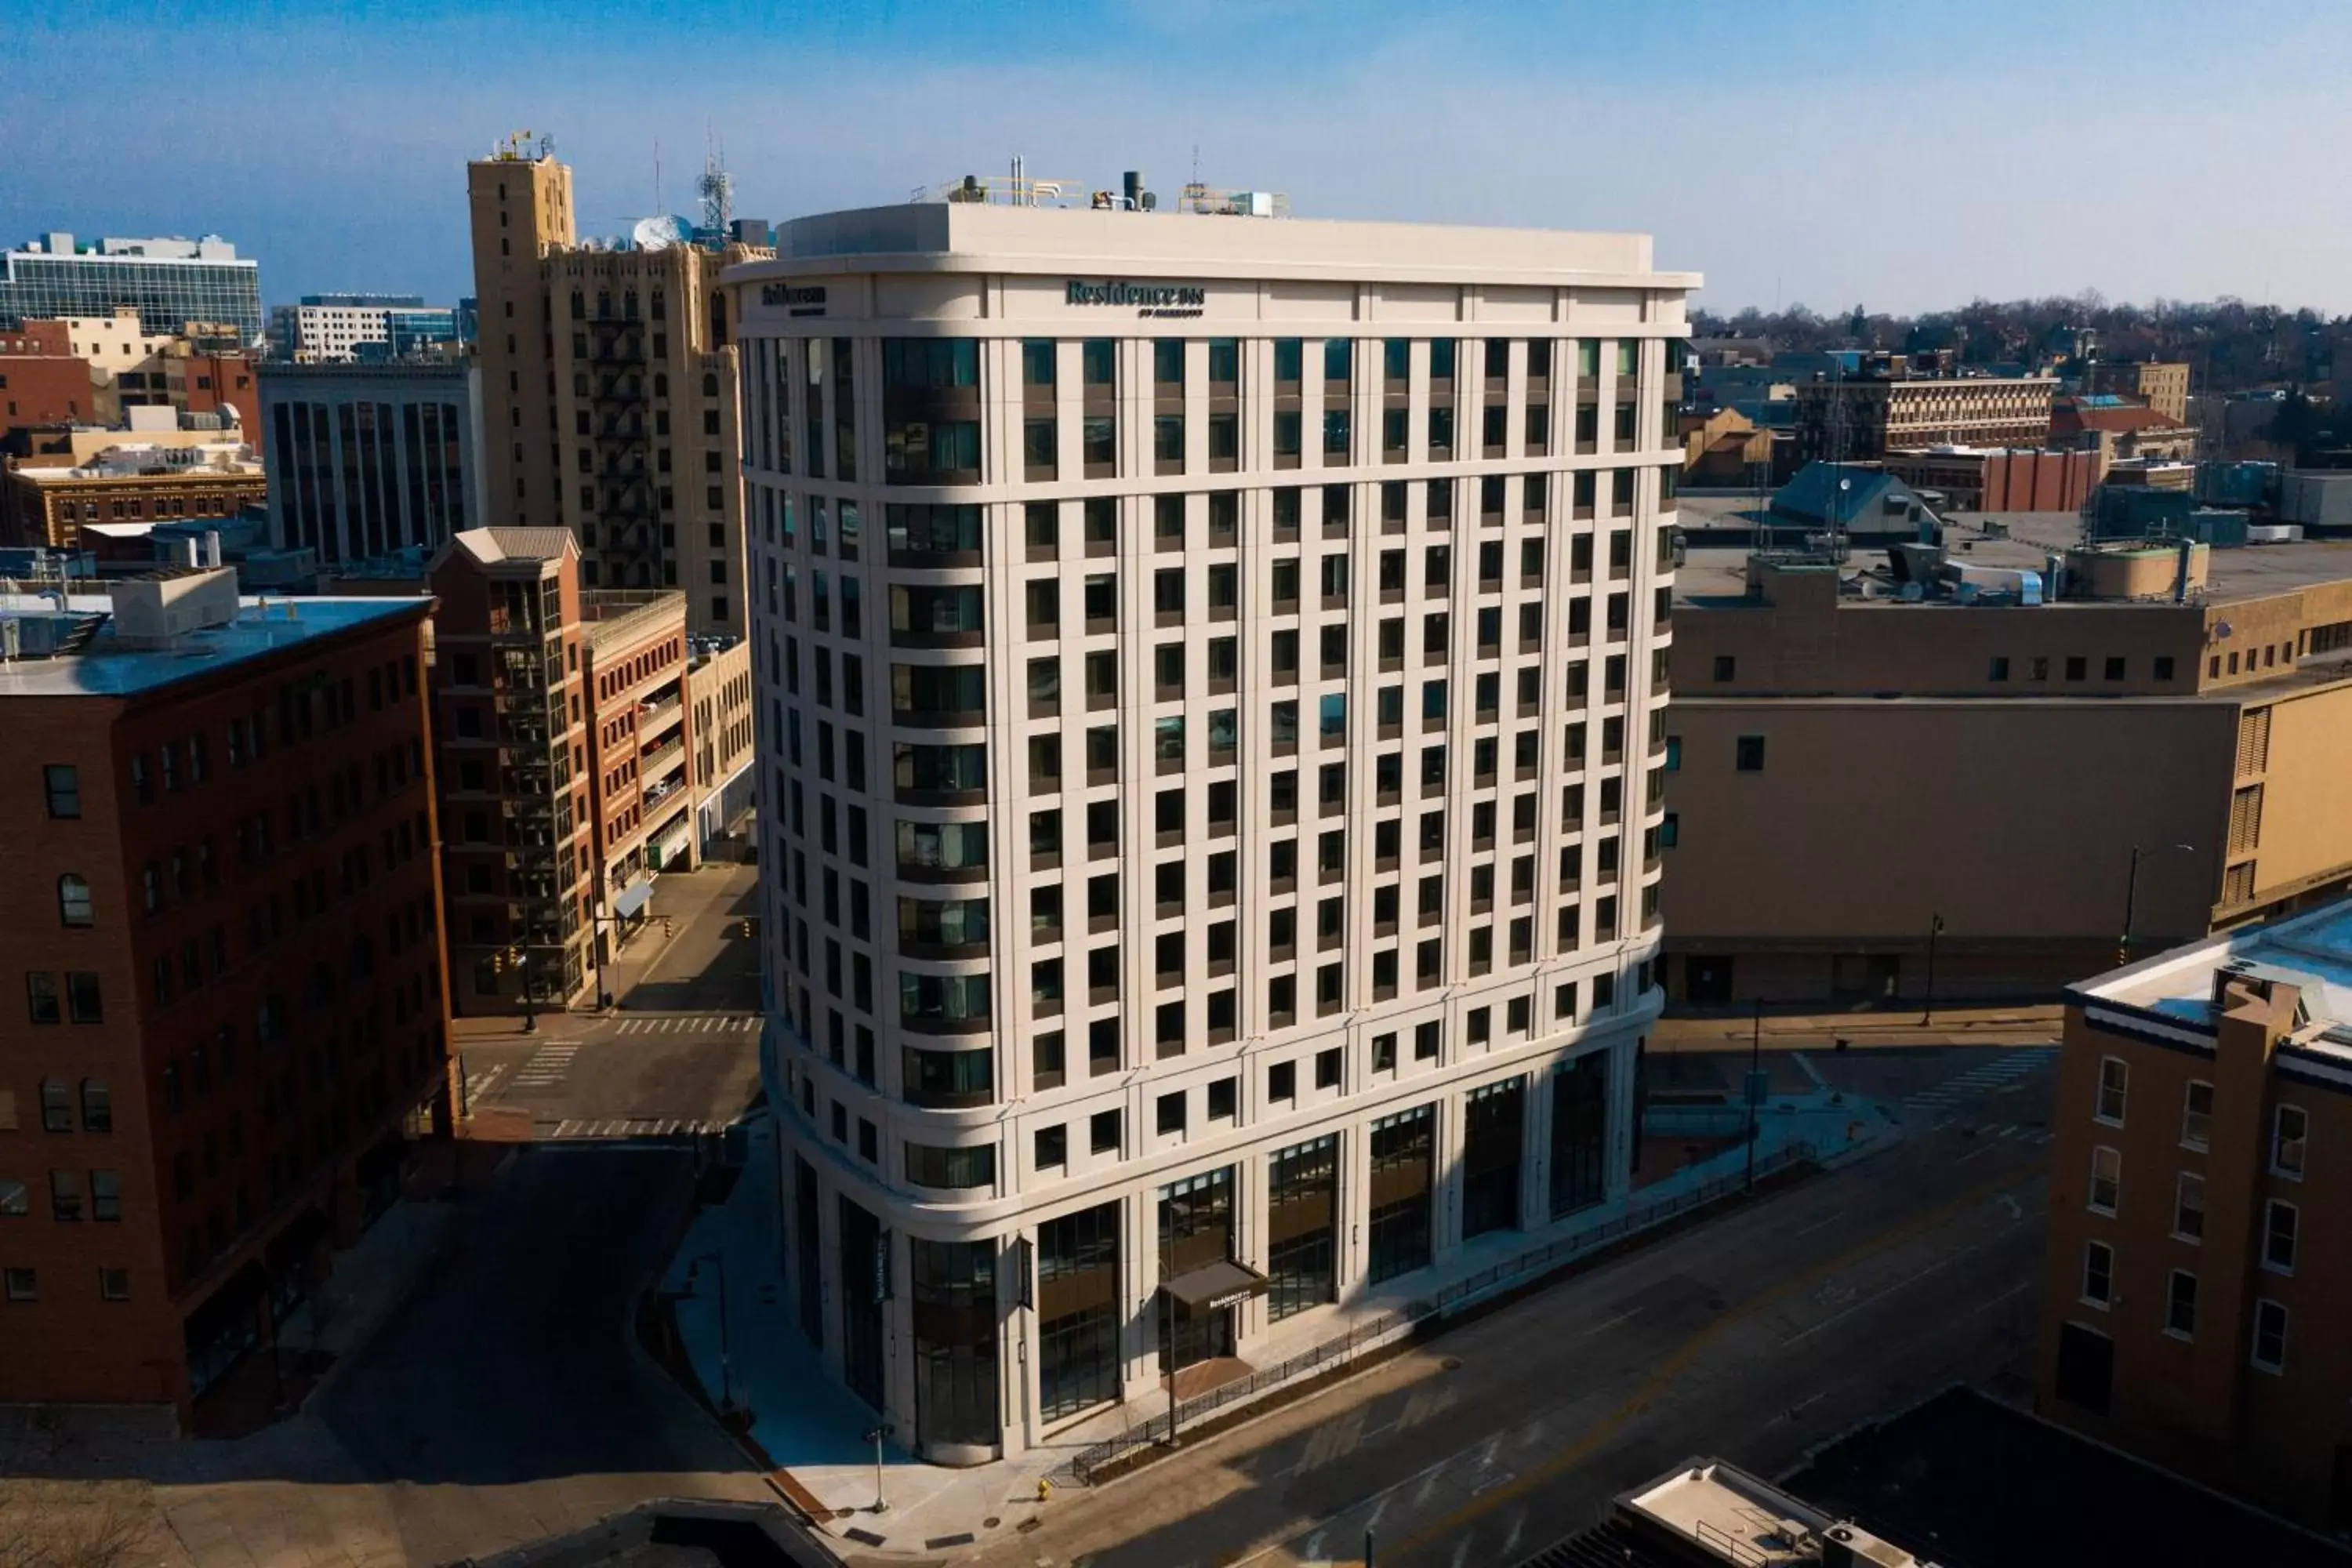 Property building in Residence Inn by Marriott Grand Rapids Downtown